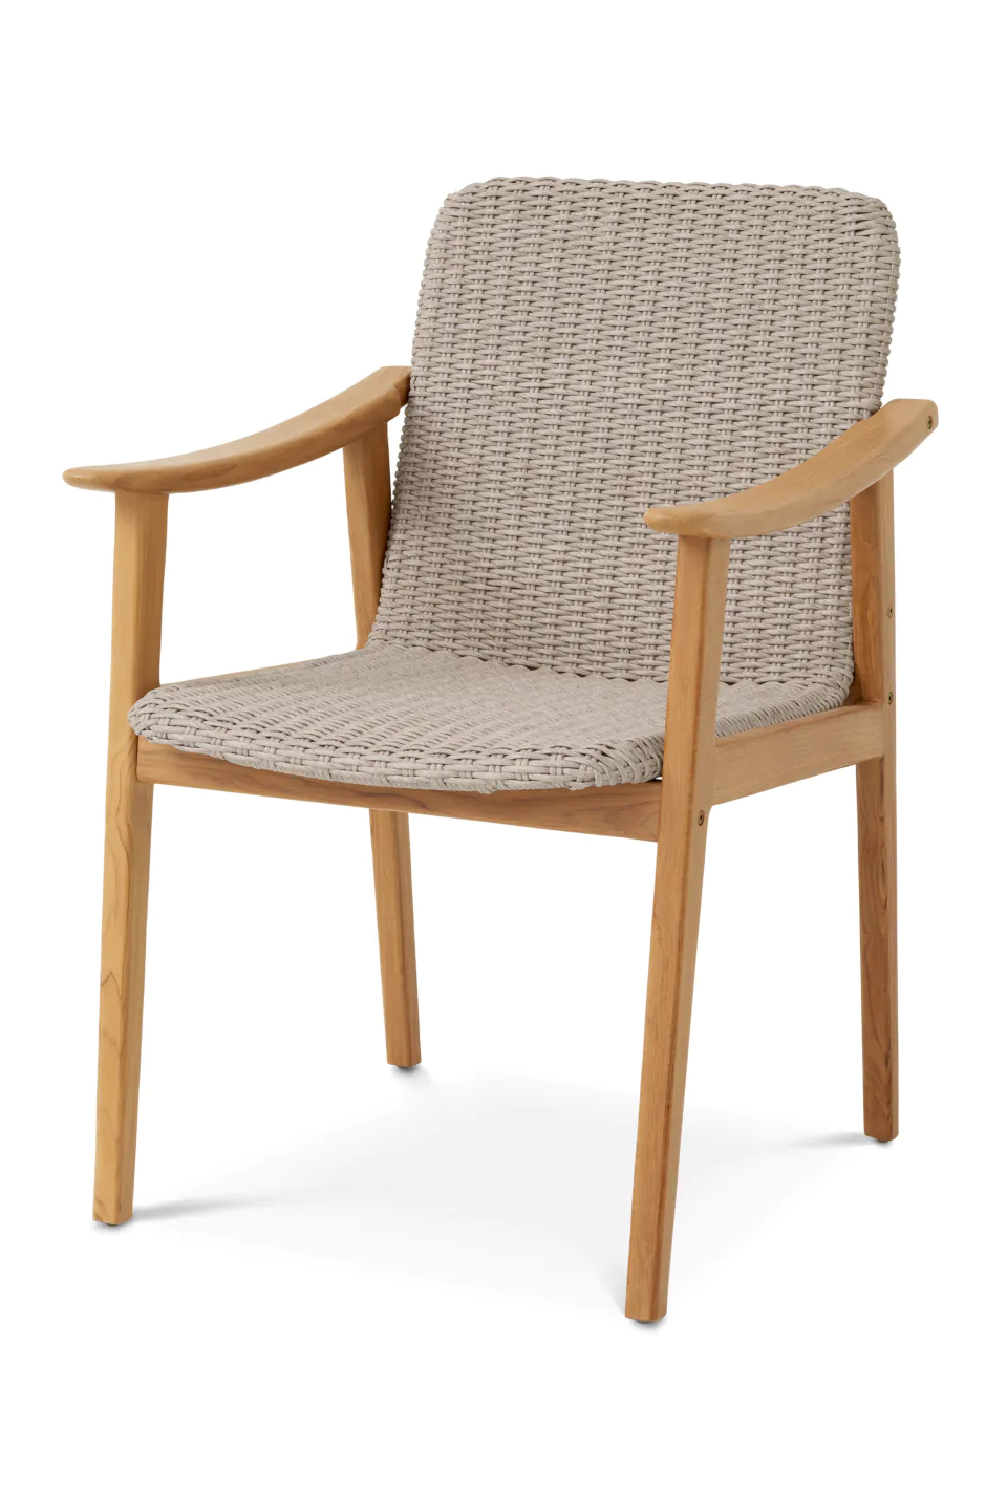 Taupe Weave Outdoor Dining Chair | Eichholtz Honolulu | Oroa.com